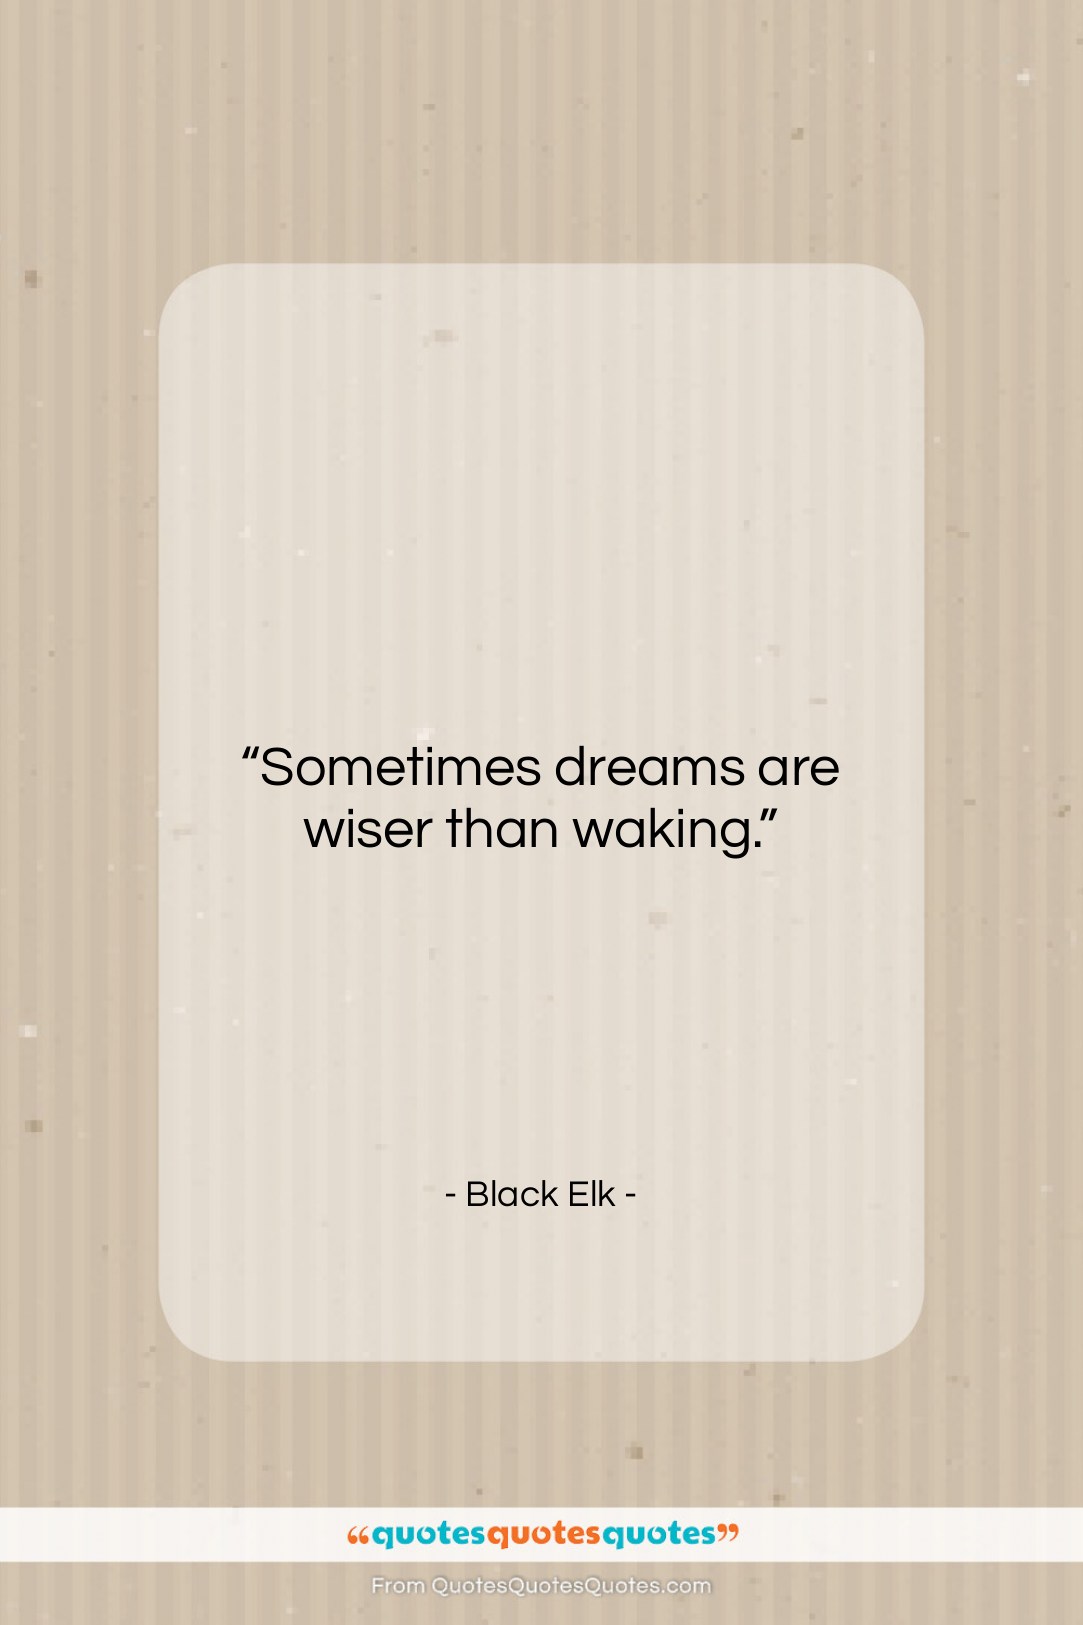 Black Elk quote: “Sometimes dreams are wiser than waking….”- at QuotesQuotesQuotes.com